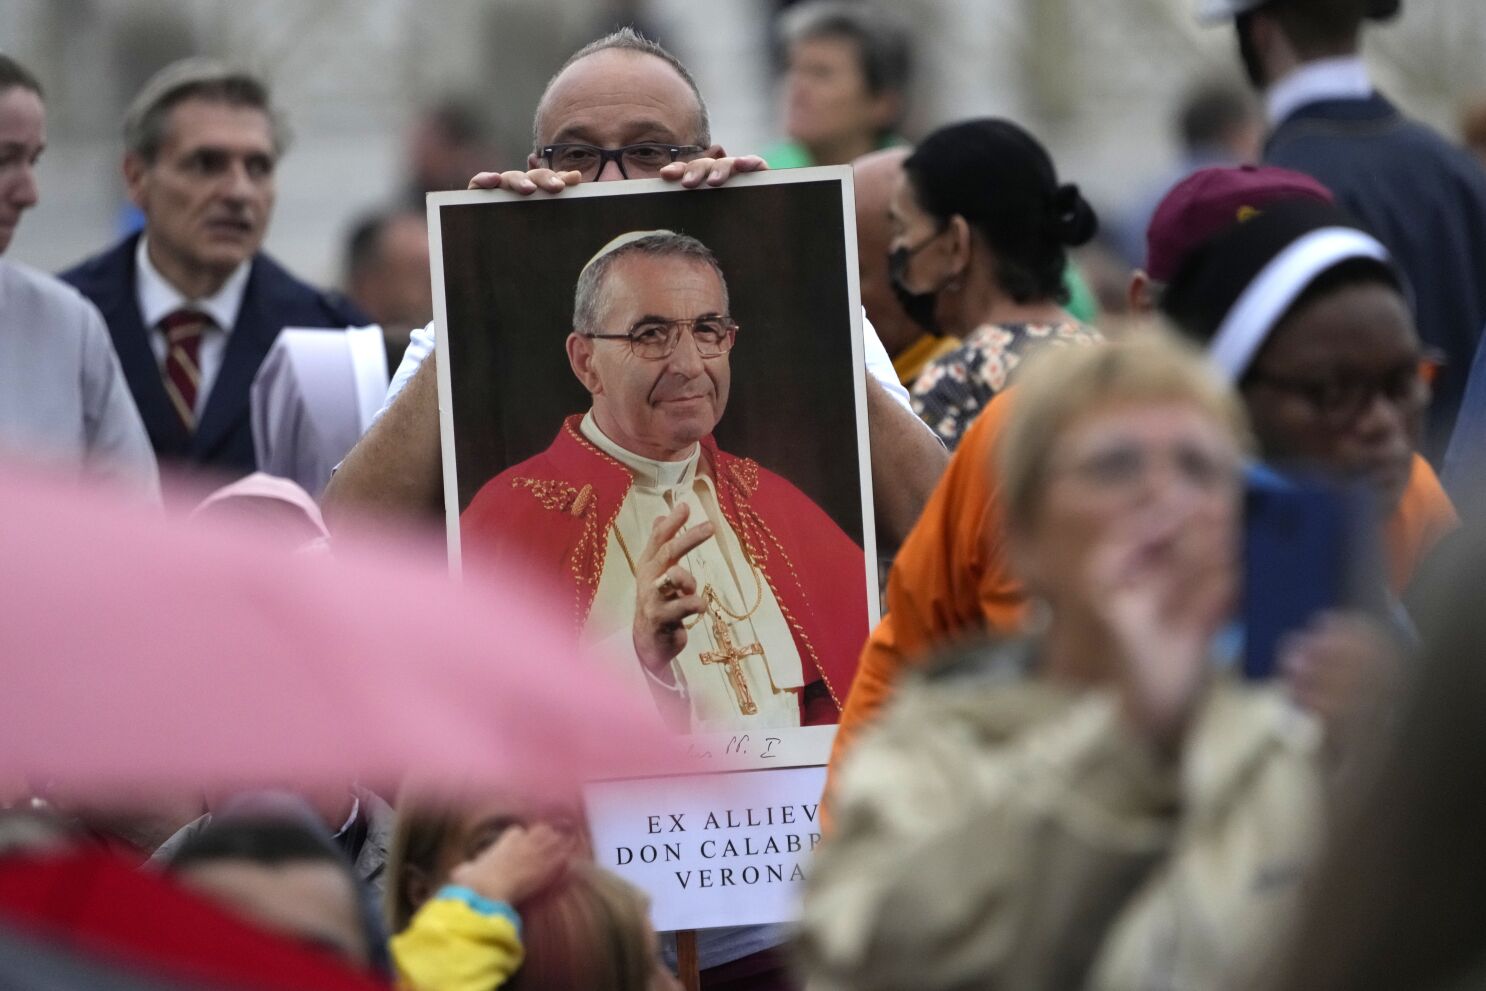 John Paul I, the pope who only 33 days, is beatified - Los Angeles Times